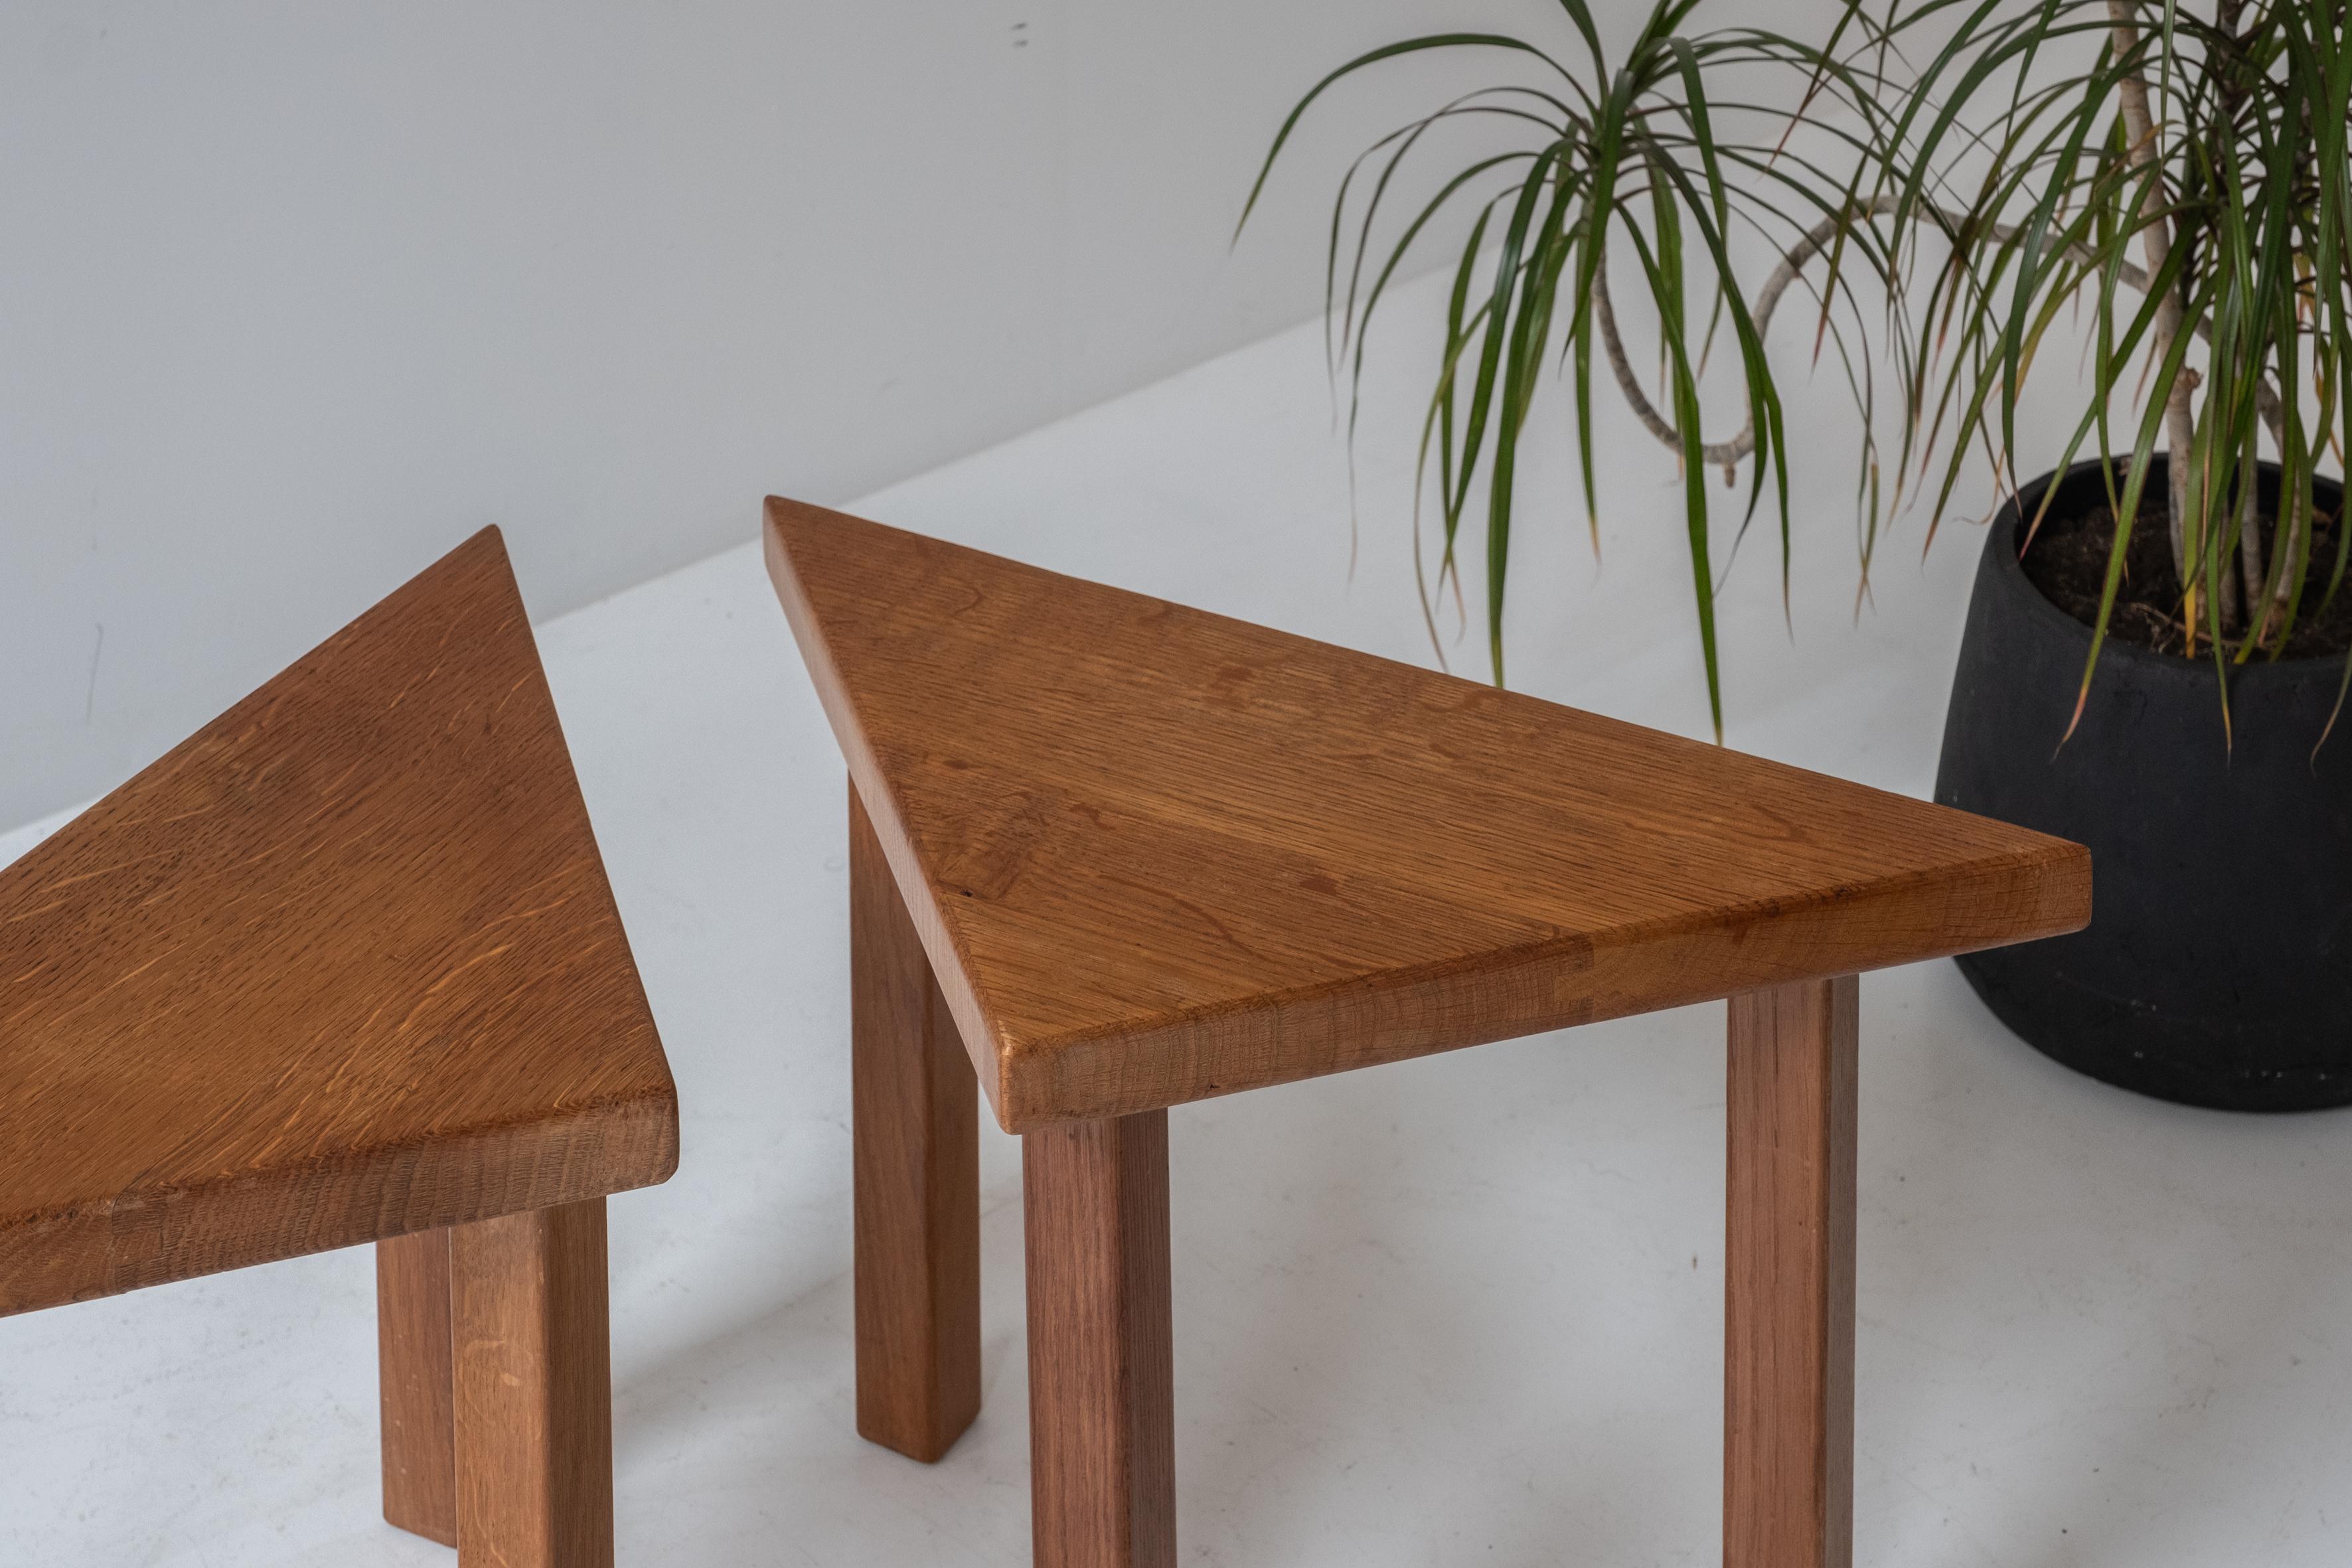 Set of 4 triangle shaped oak side tables from the 1960s.  4